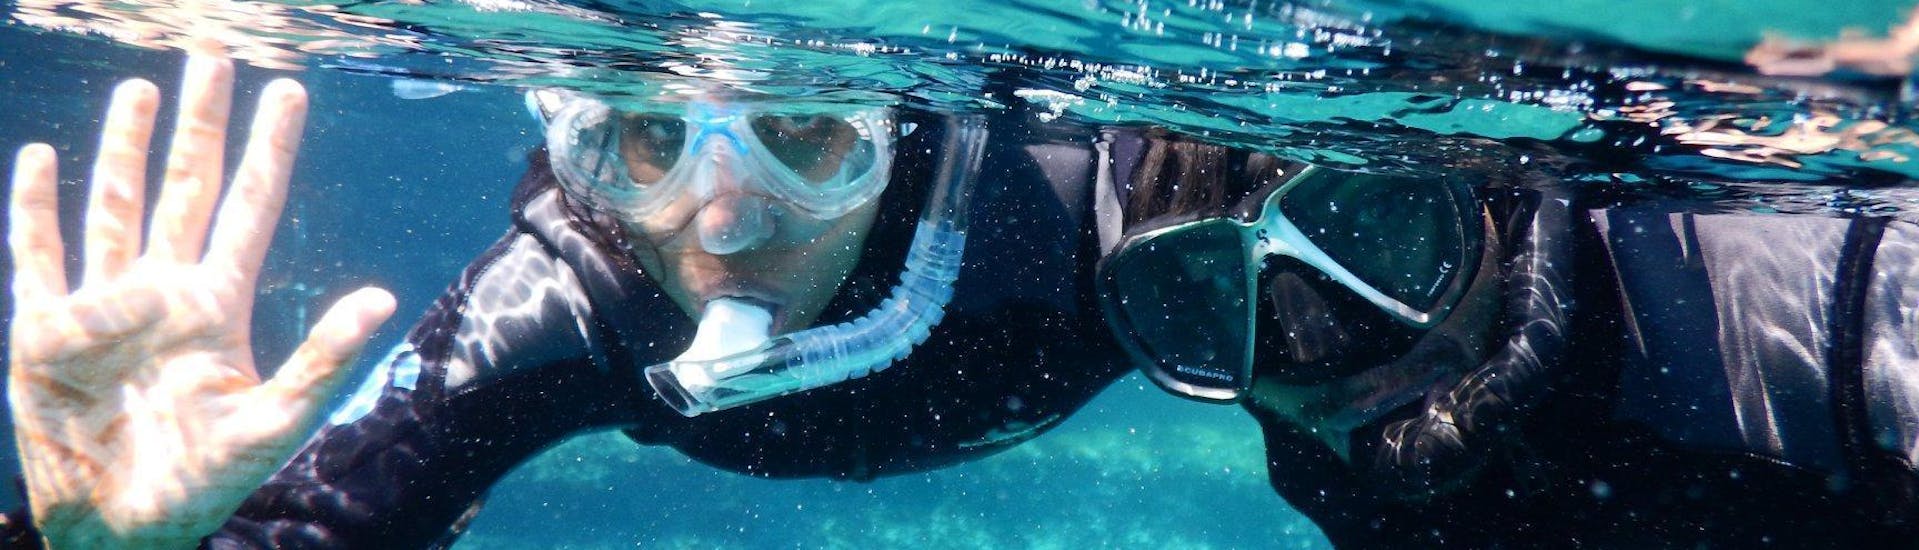 Two people enjoying their Snorkeling Adventure at Mykonos together with an experienced instructor from the Mykonos Diving Center.